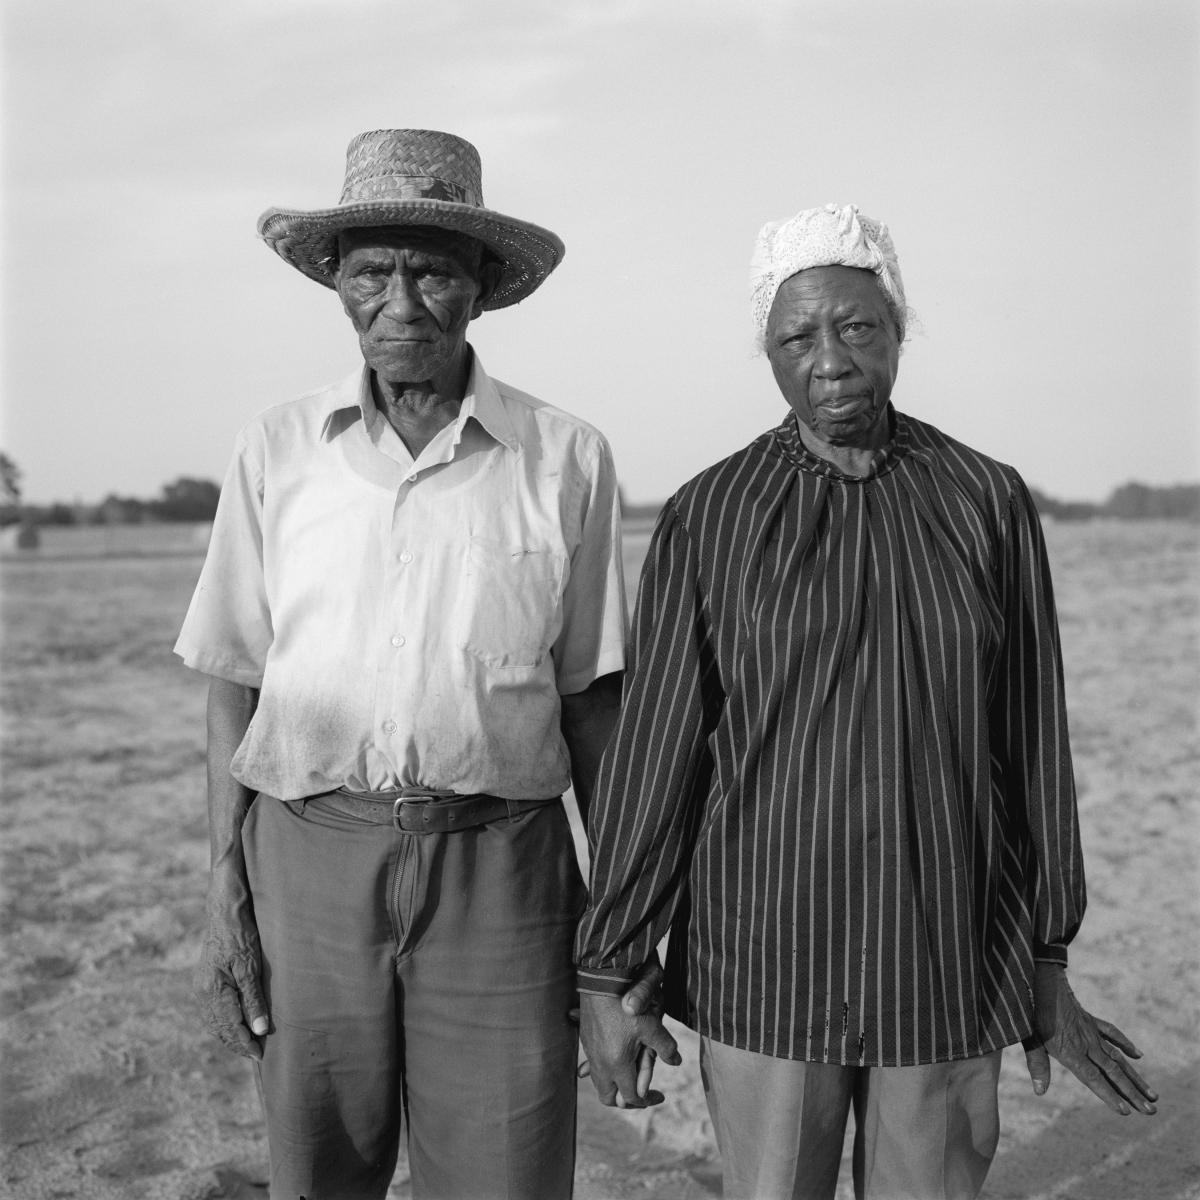 <p><center>Marion County, Florida:</center></p>
A second generation farmer, John Burton grows and handpicks Valencia peanuts with the help of his wife, Evelena. Because the peanuts grow on the roots, the farmers must pull the plant from the soil before picking the shells. The process strains back muscles and fingers, as is evident when Evelena stretches he hand after working in the field for several hours. : Images : AMERICAN BLACK FARMERS PROJECT - John Ficara